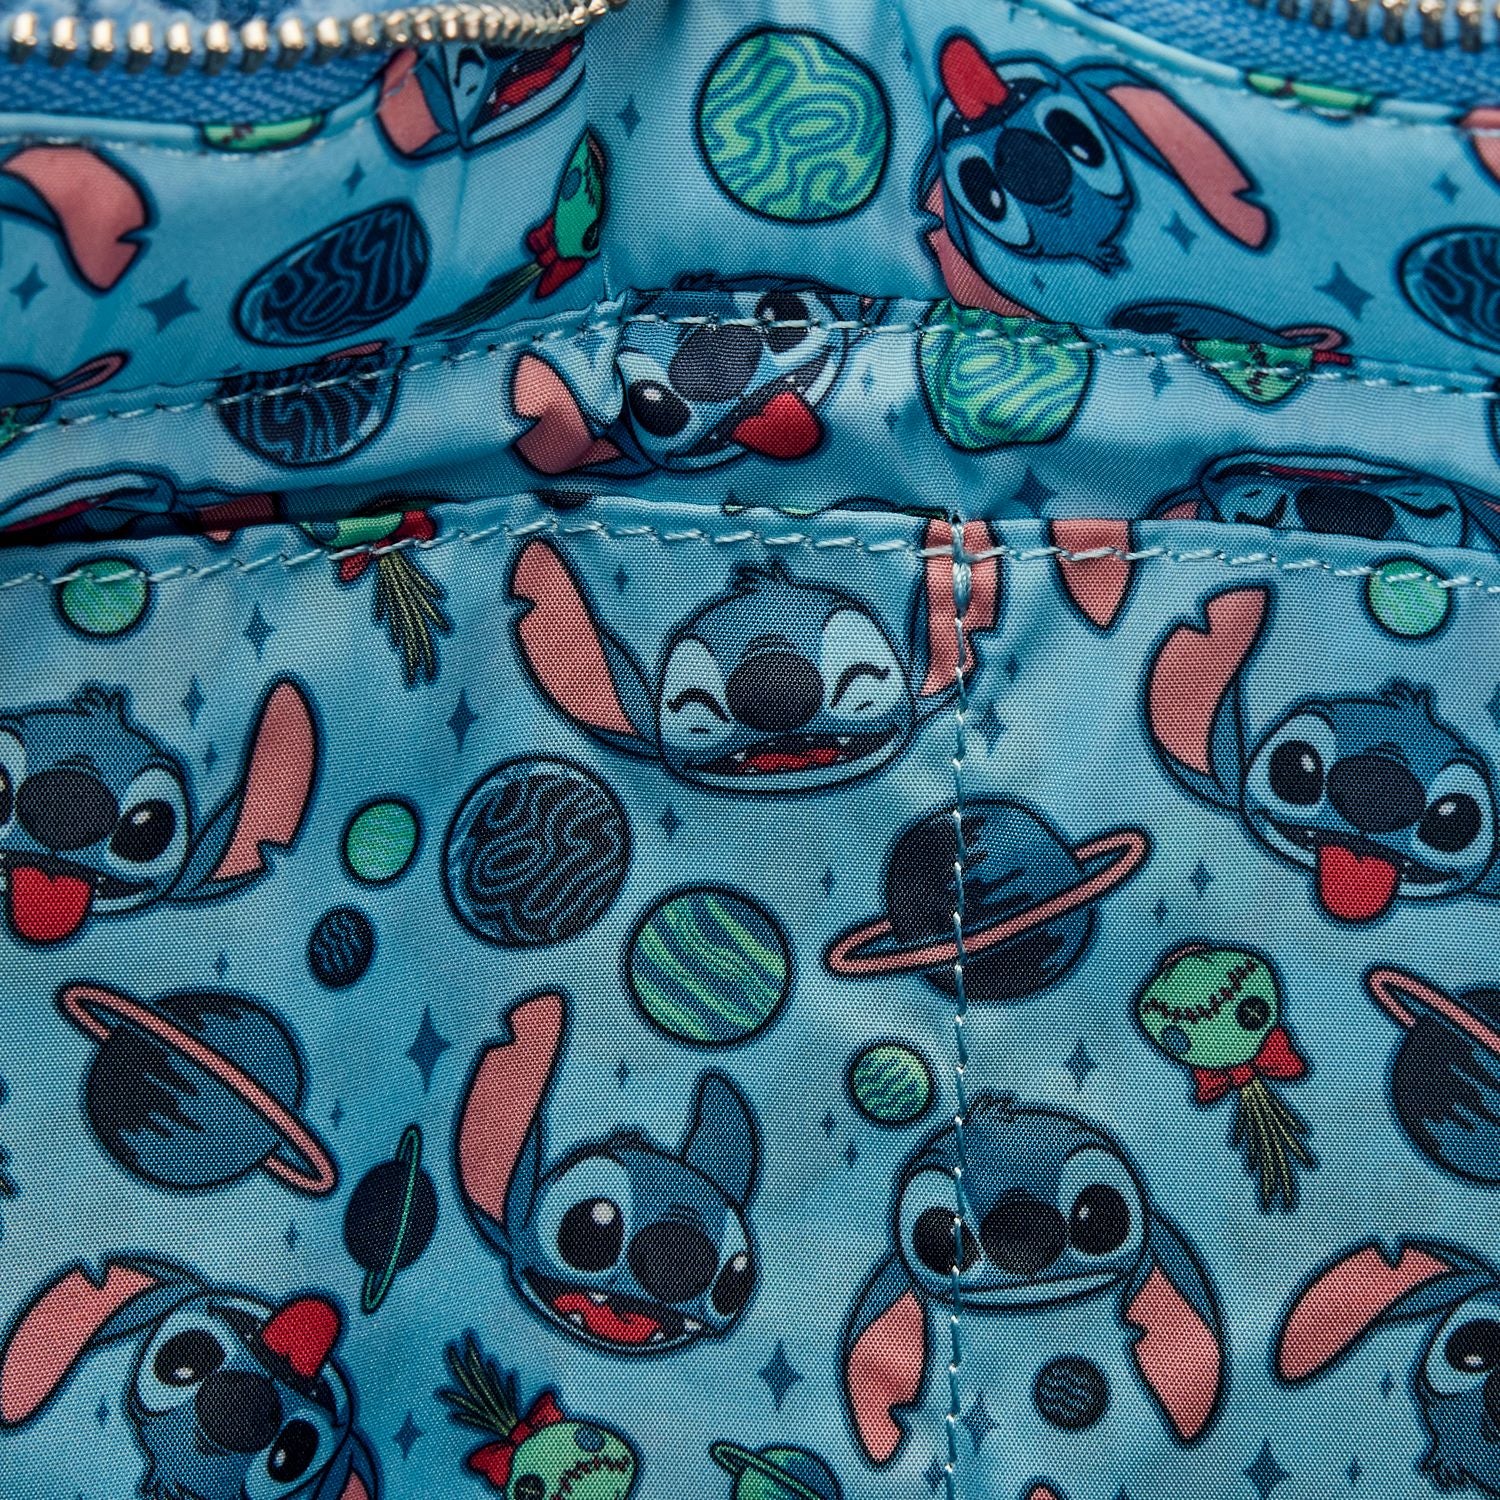 Loungefly DISNEY STITCH PLUSH TOTE BAG WITH COIN BAG